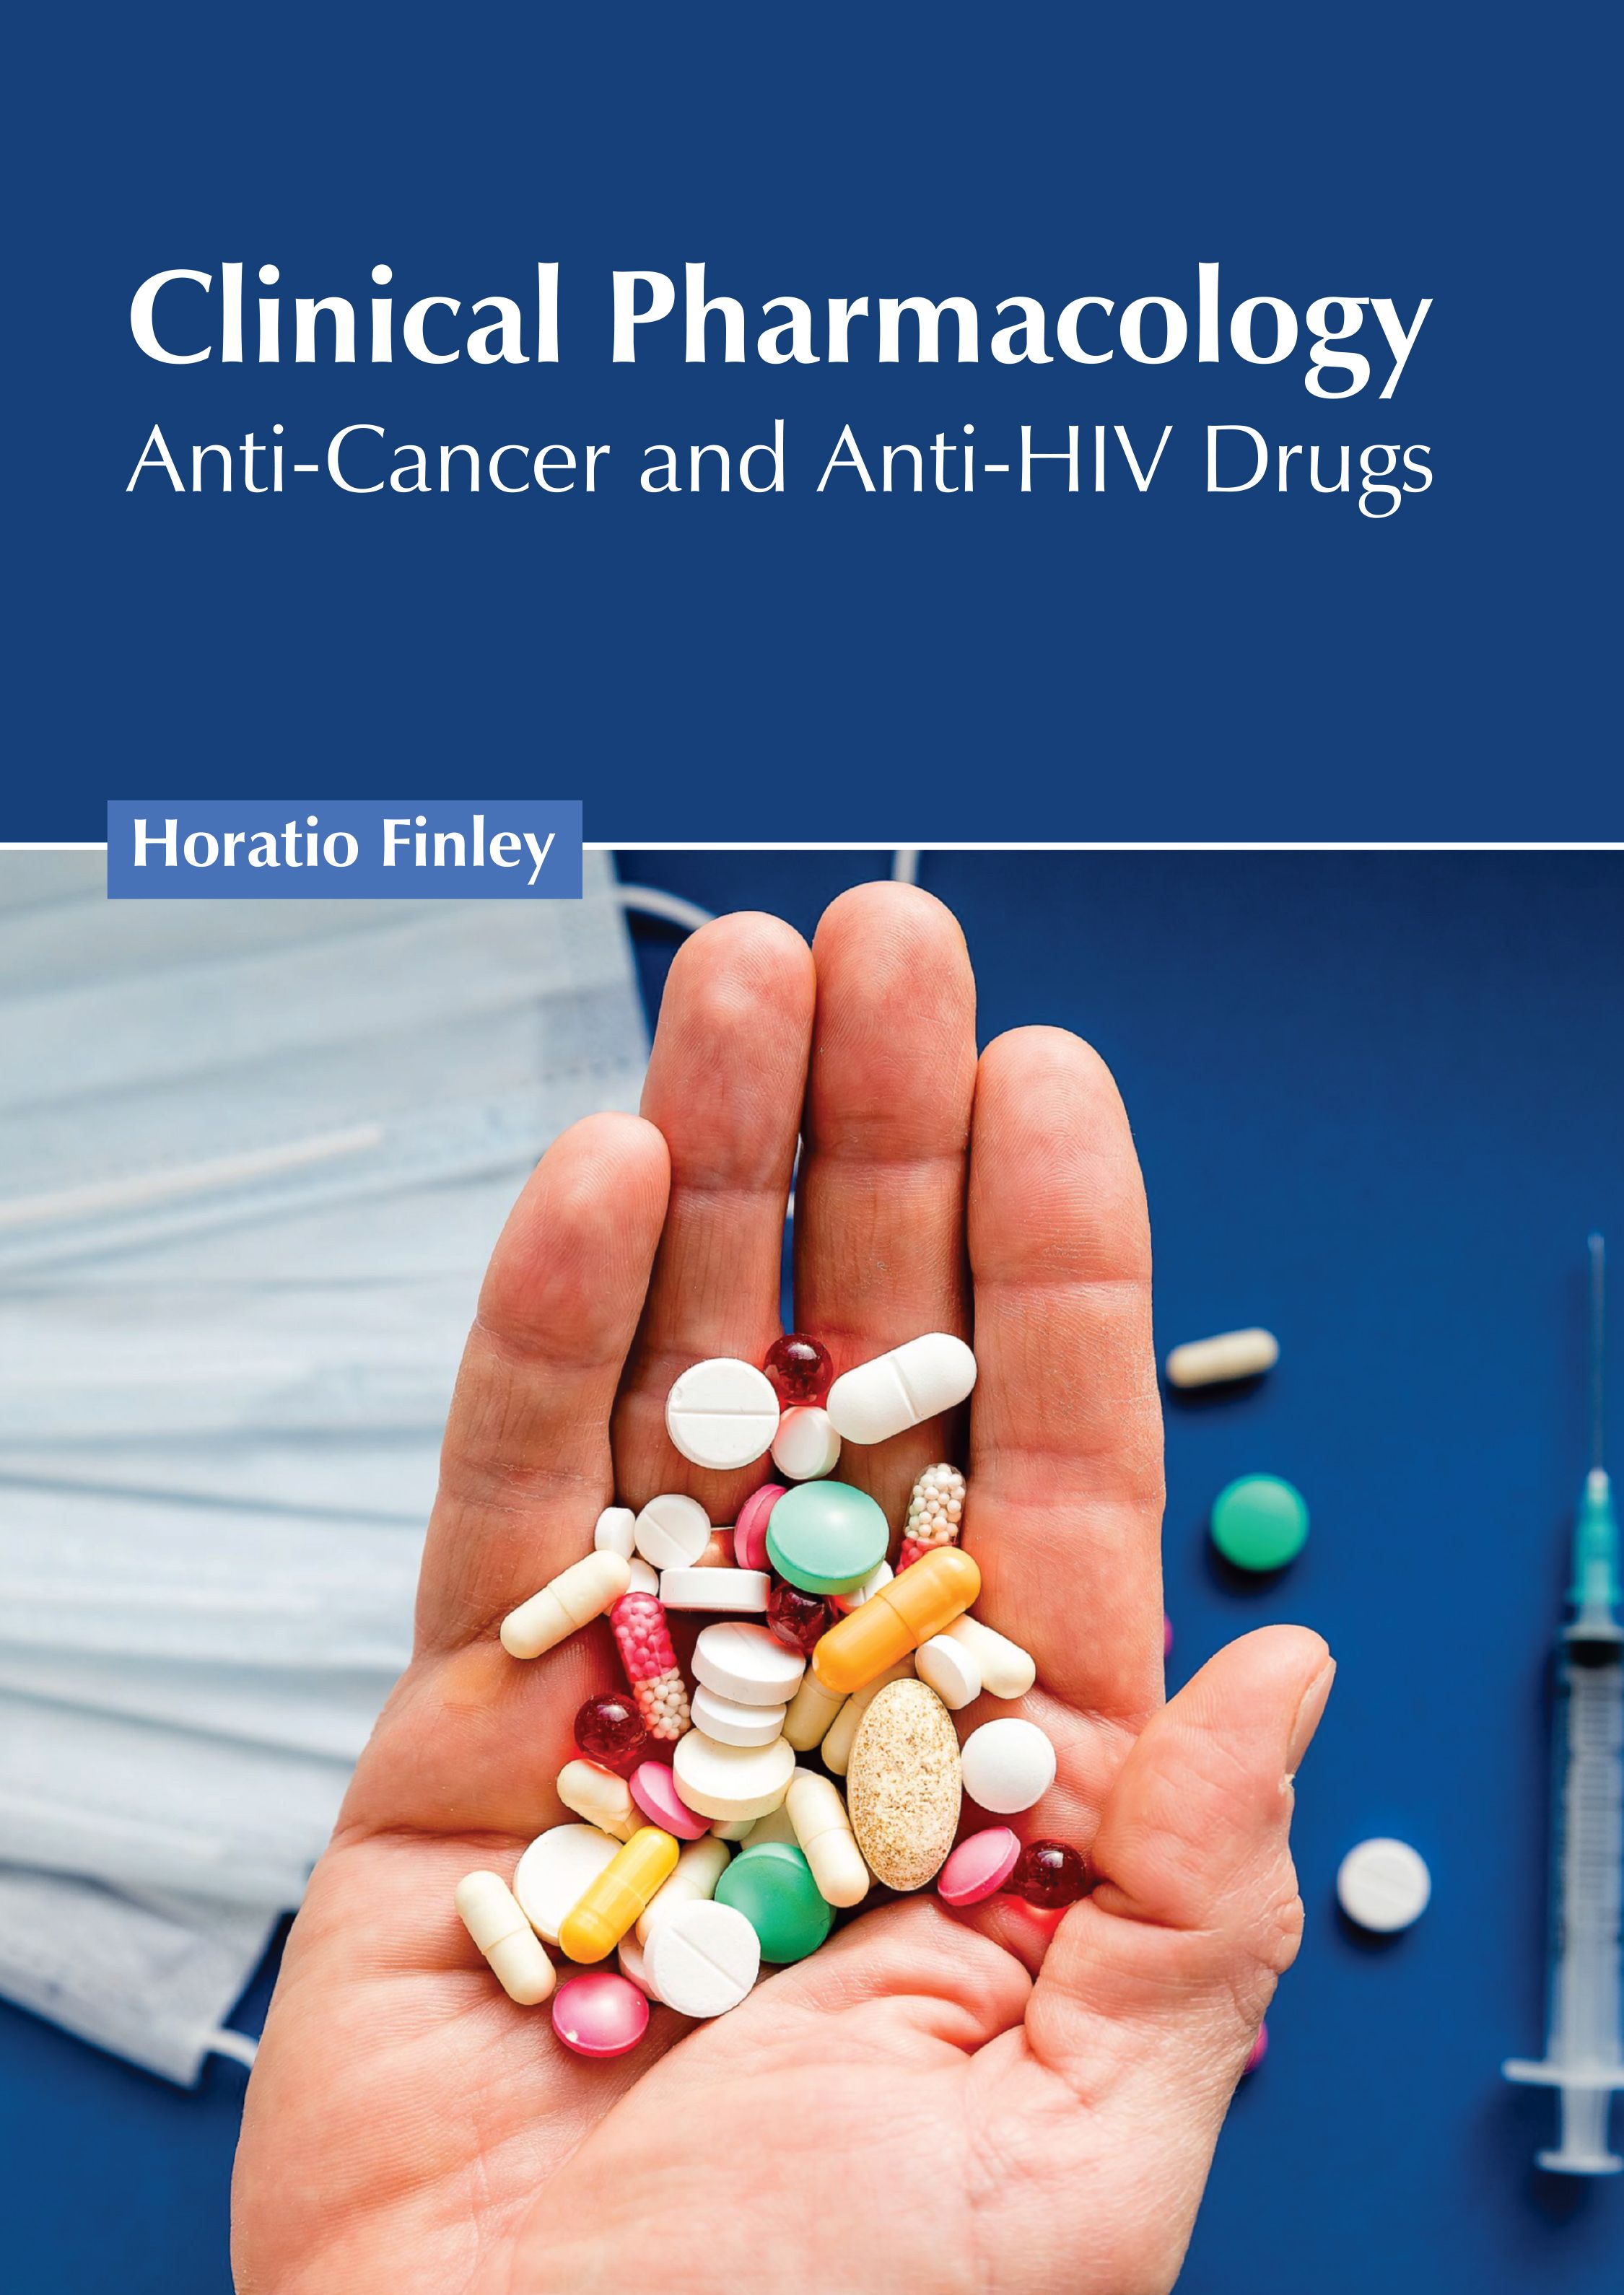 CLINICAL PHARMACOLOGY: ANTI-CANCER AND ANTI-HIV DRUGS